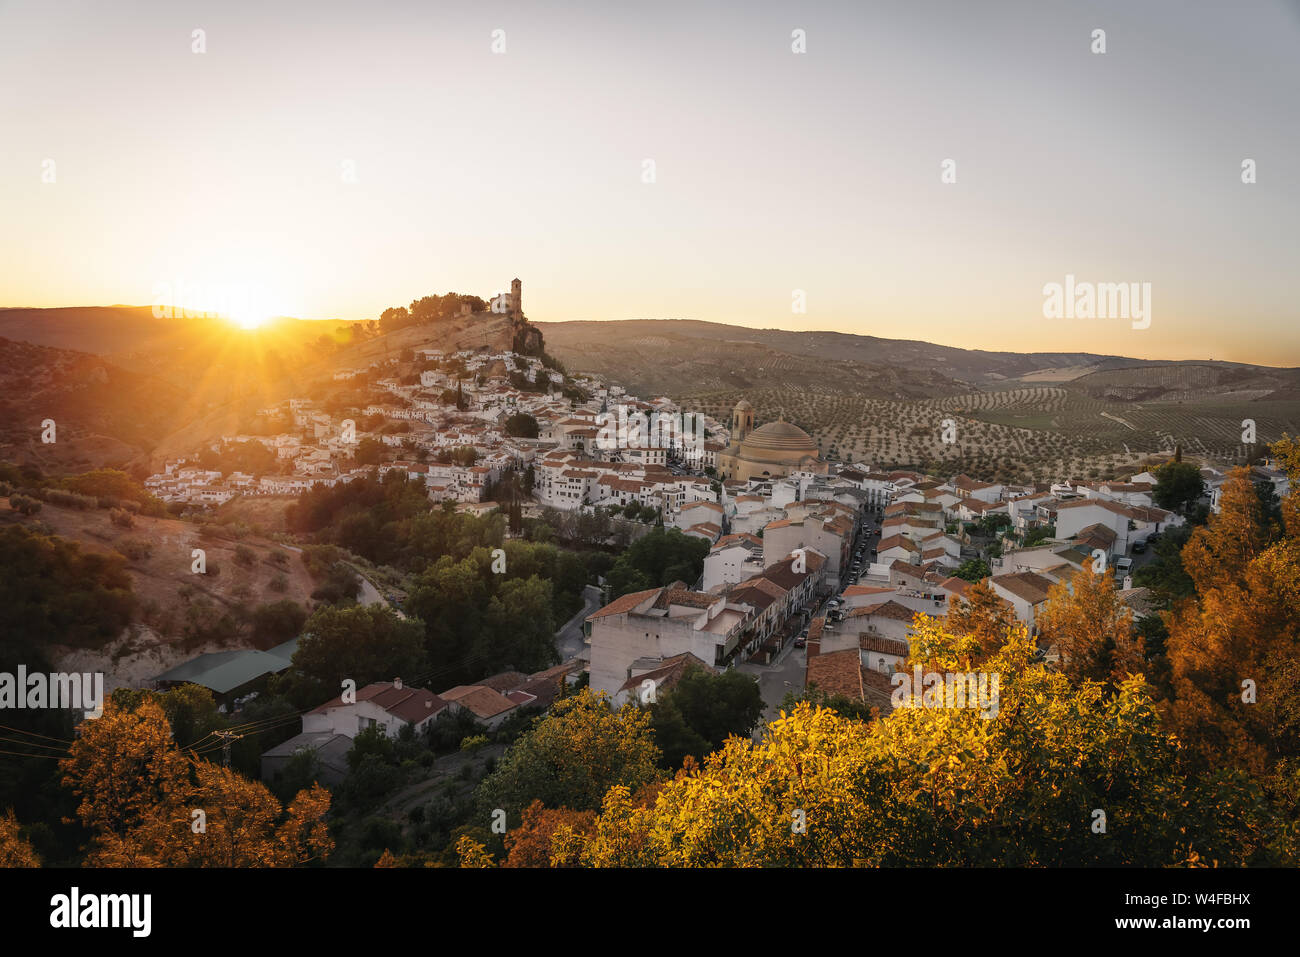 Aerial view of Montefrio city at sunset - Montefrio, Granada Province, Andalusia, Spain Stock Photo